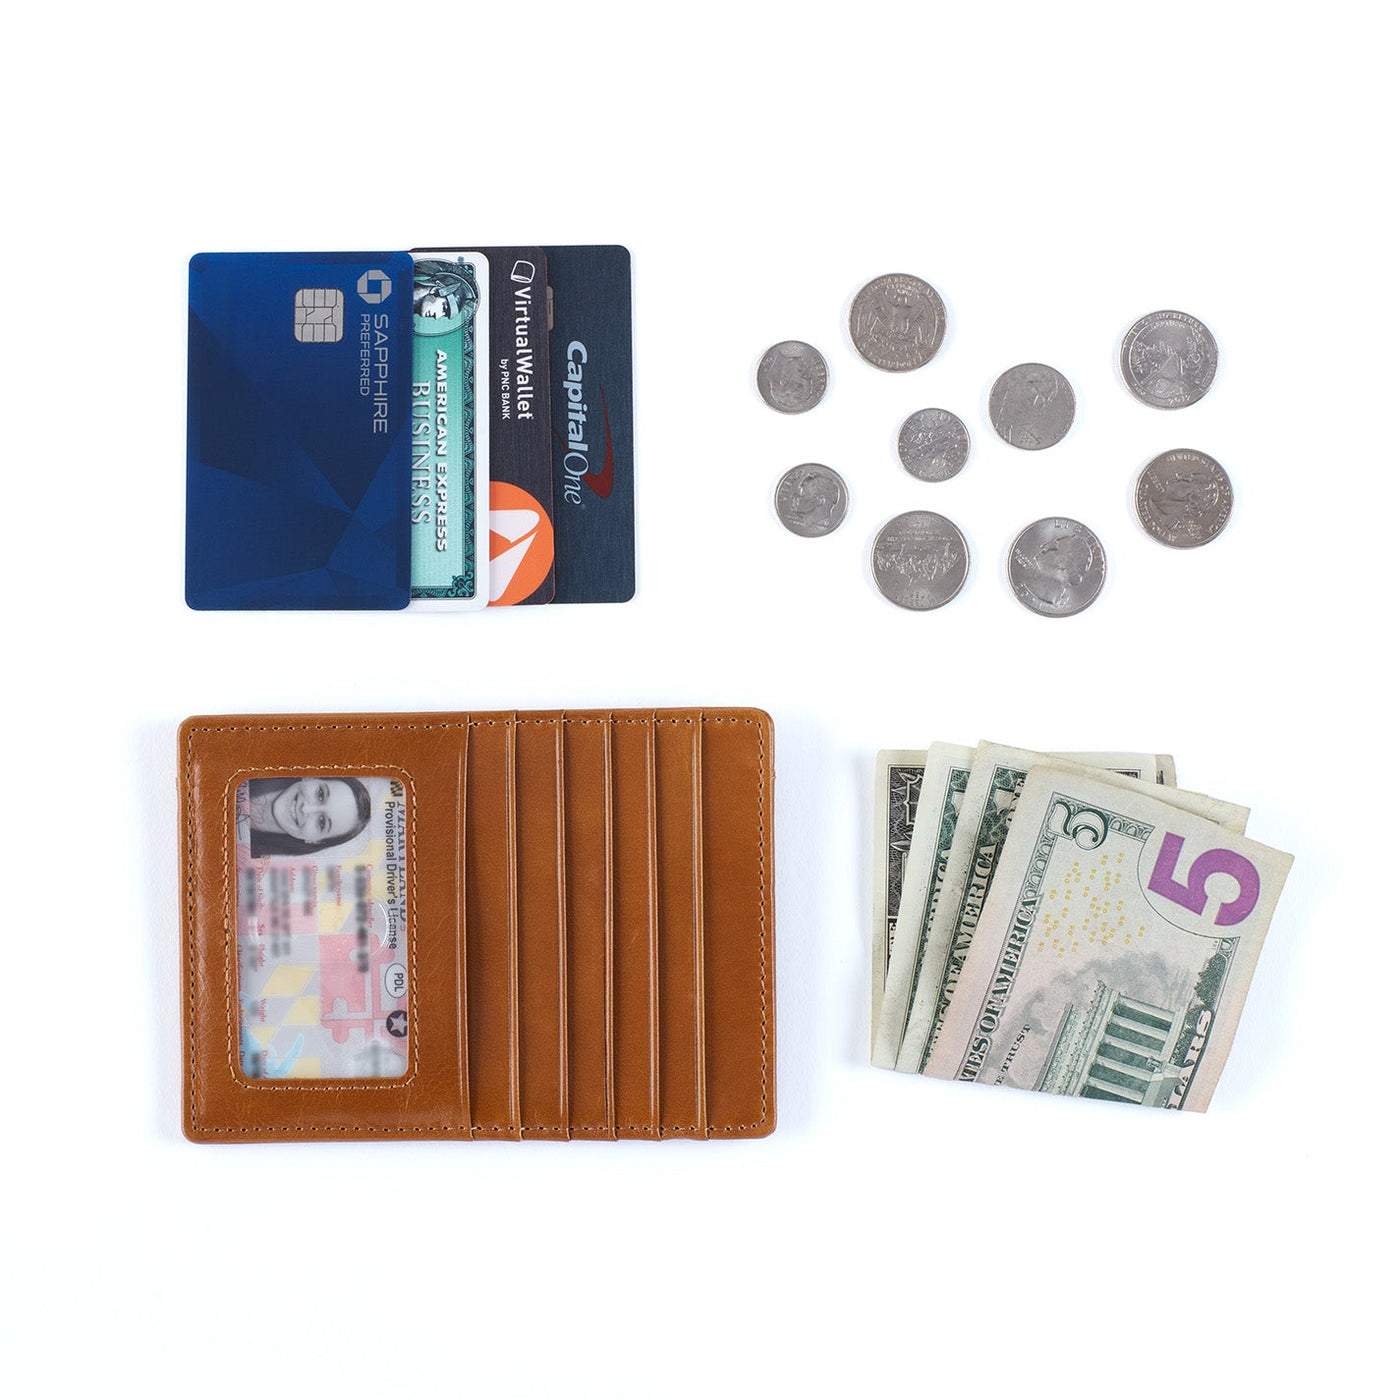 Euro Slide Card Case in Polished Leather - Warm Amber